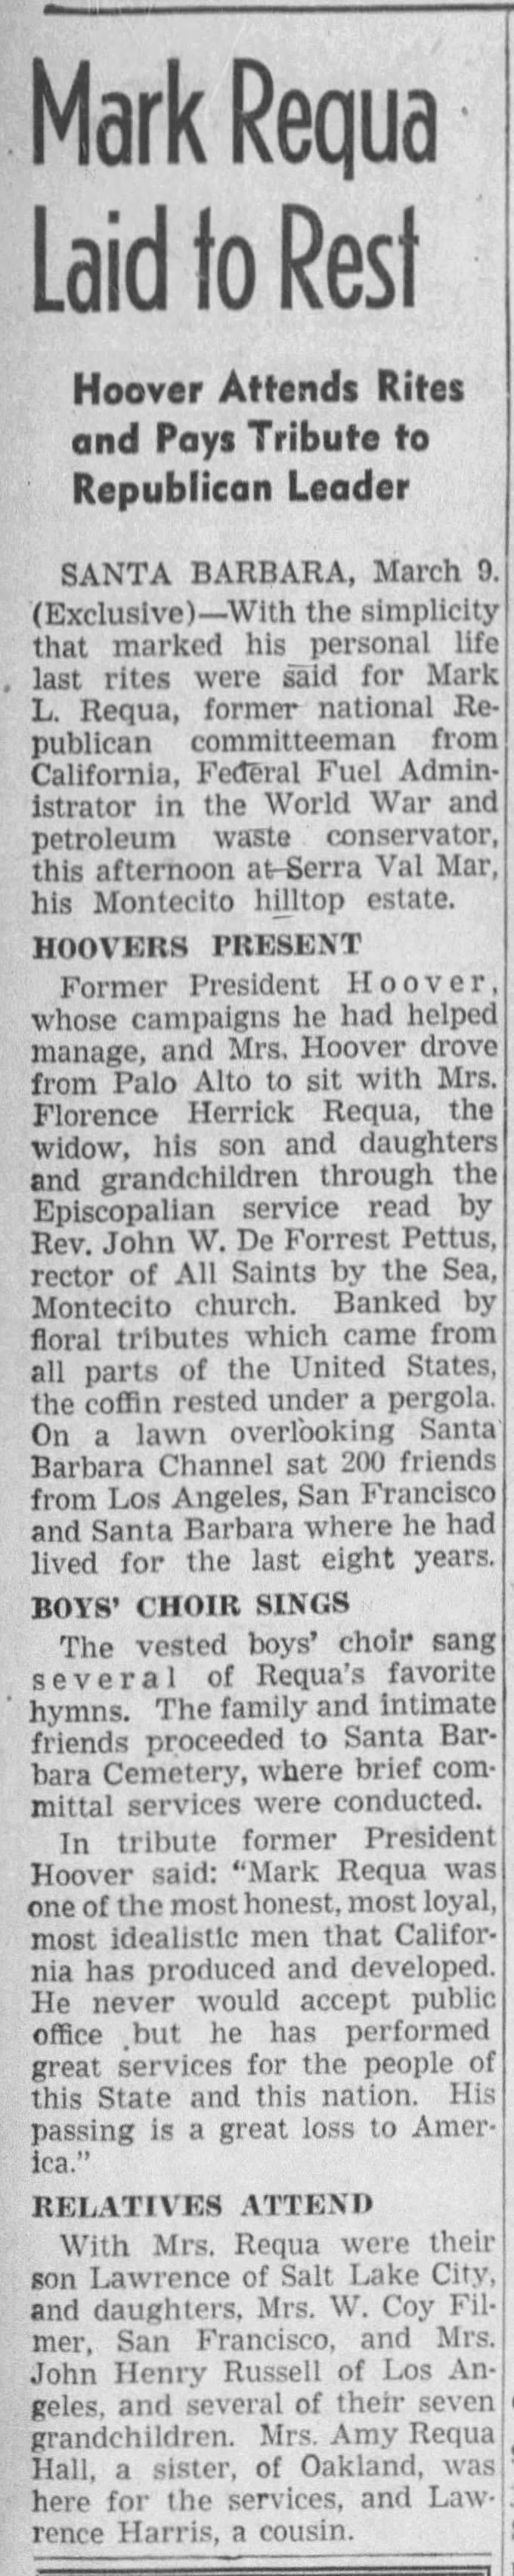 Mark Requa Laid to Rest; 10 Mar 1937; The Los Angeles Times; 3